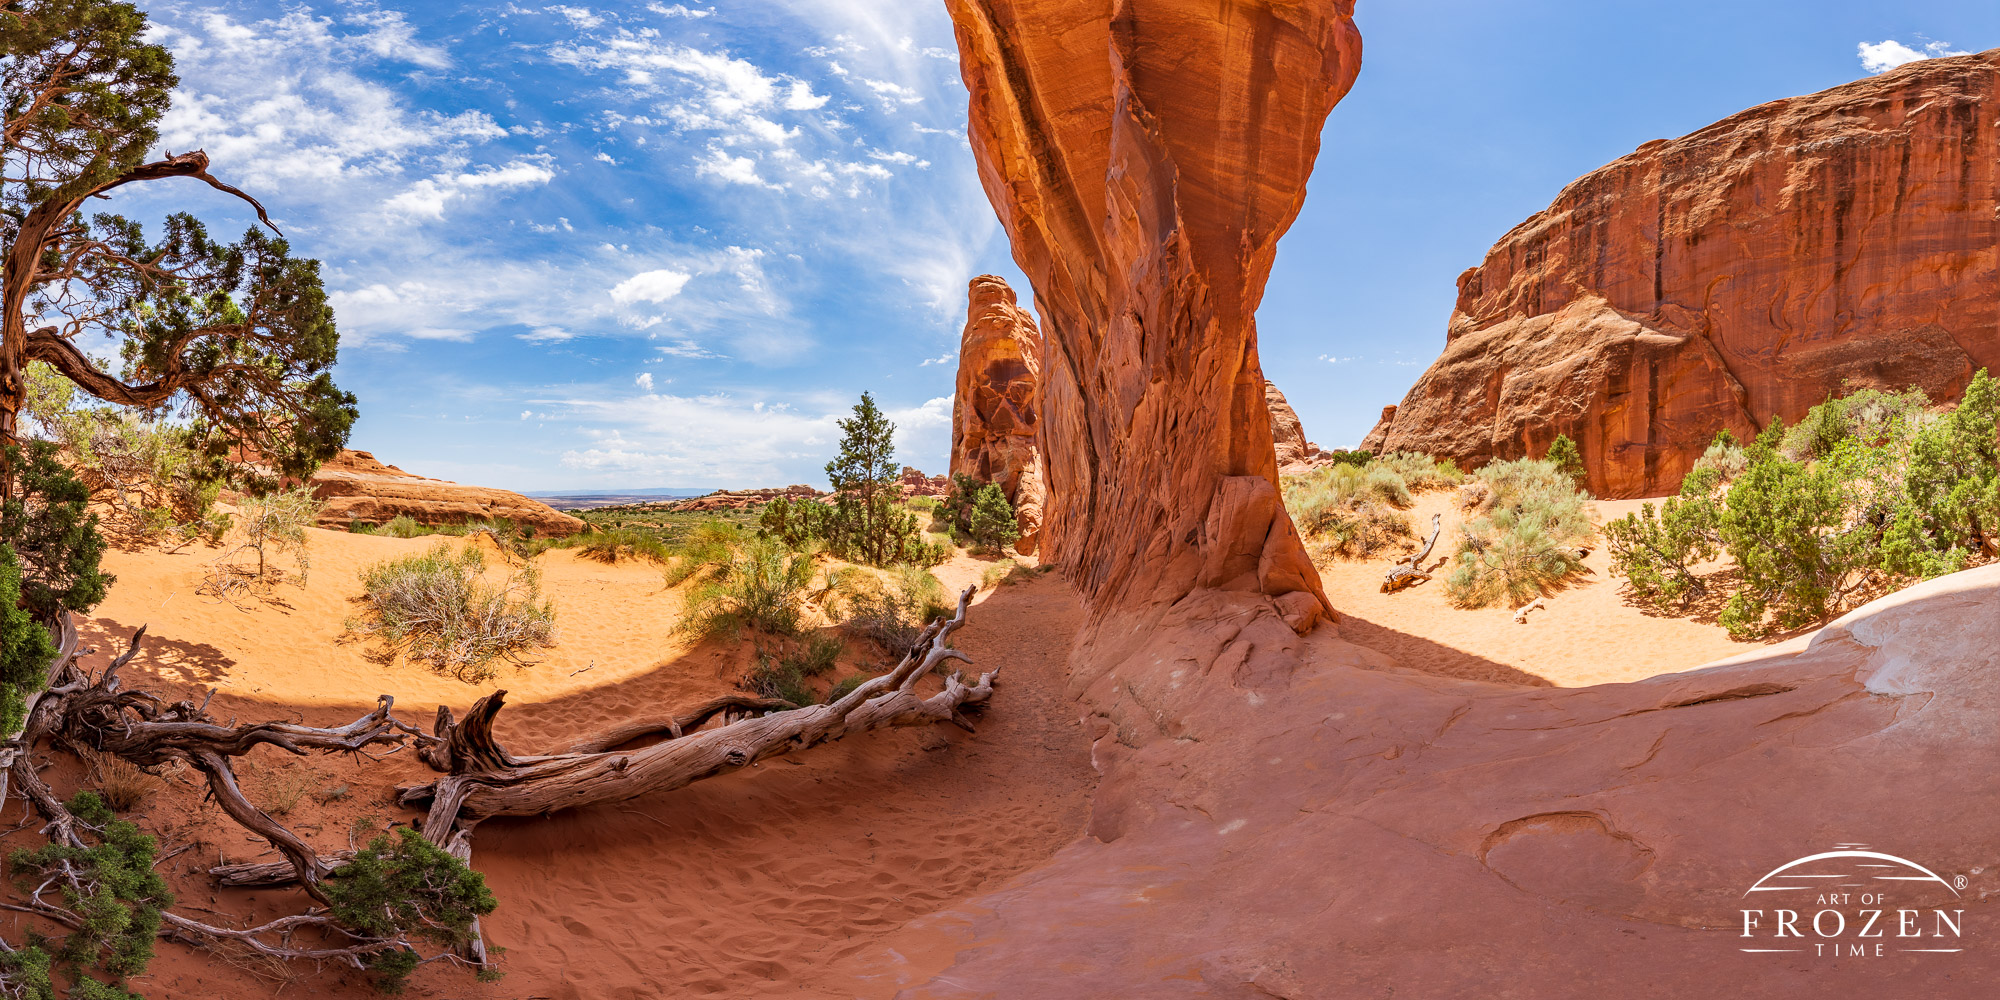 A panorama view of Pine Tree Arch from the base of the rock arch as wispy clouds pass overhead